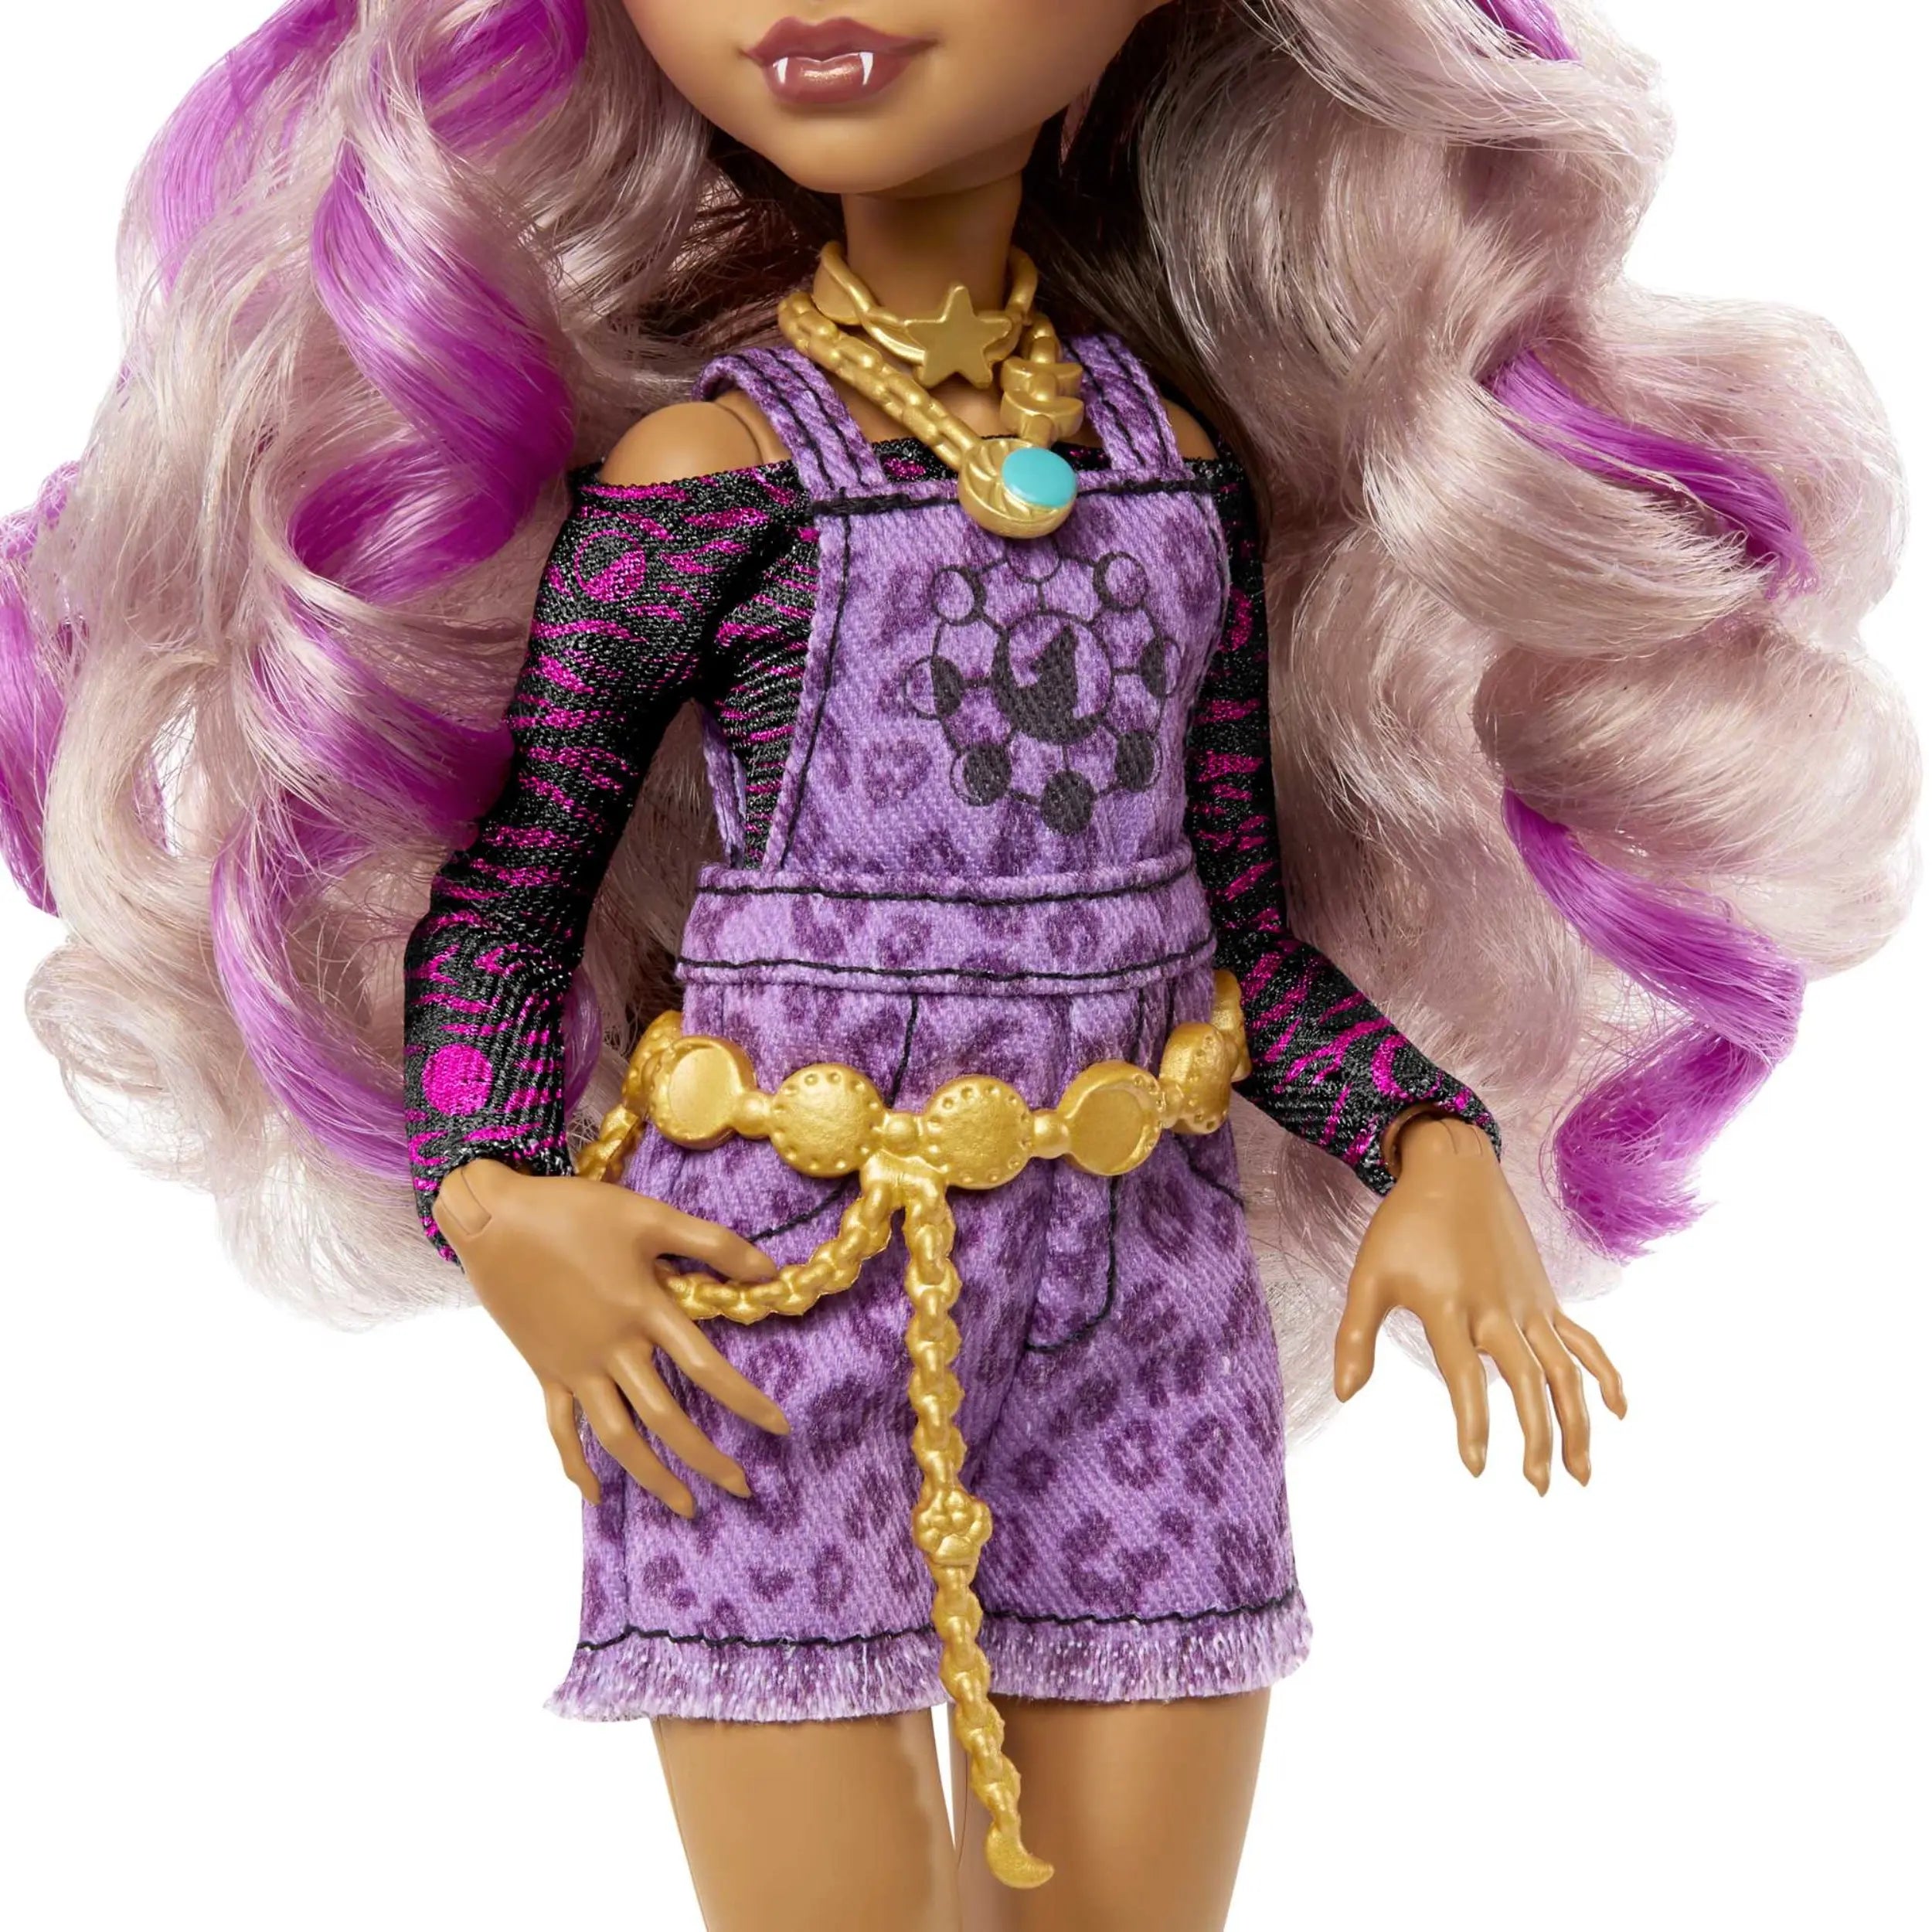 Mattel - Monster High Doll Clawdeen Wolf Doll With Pet And Accessories HHK52